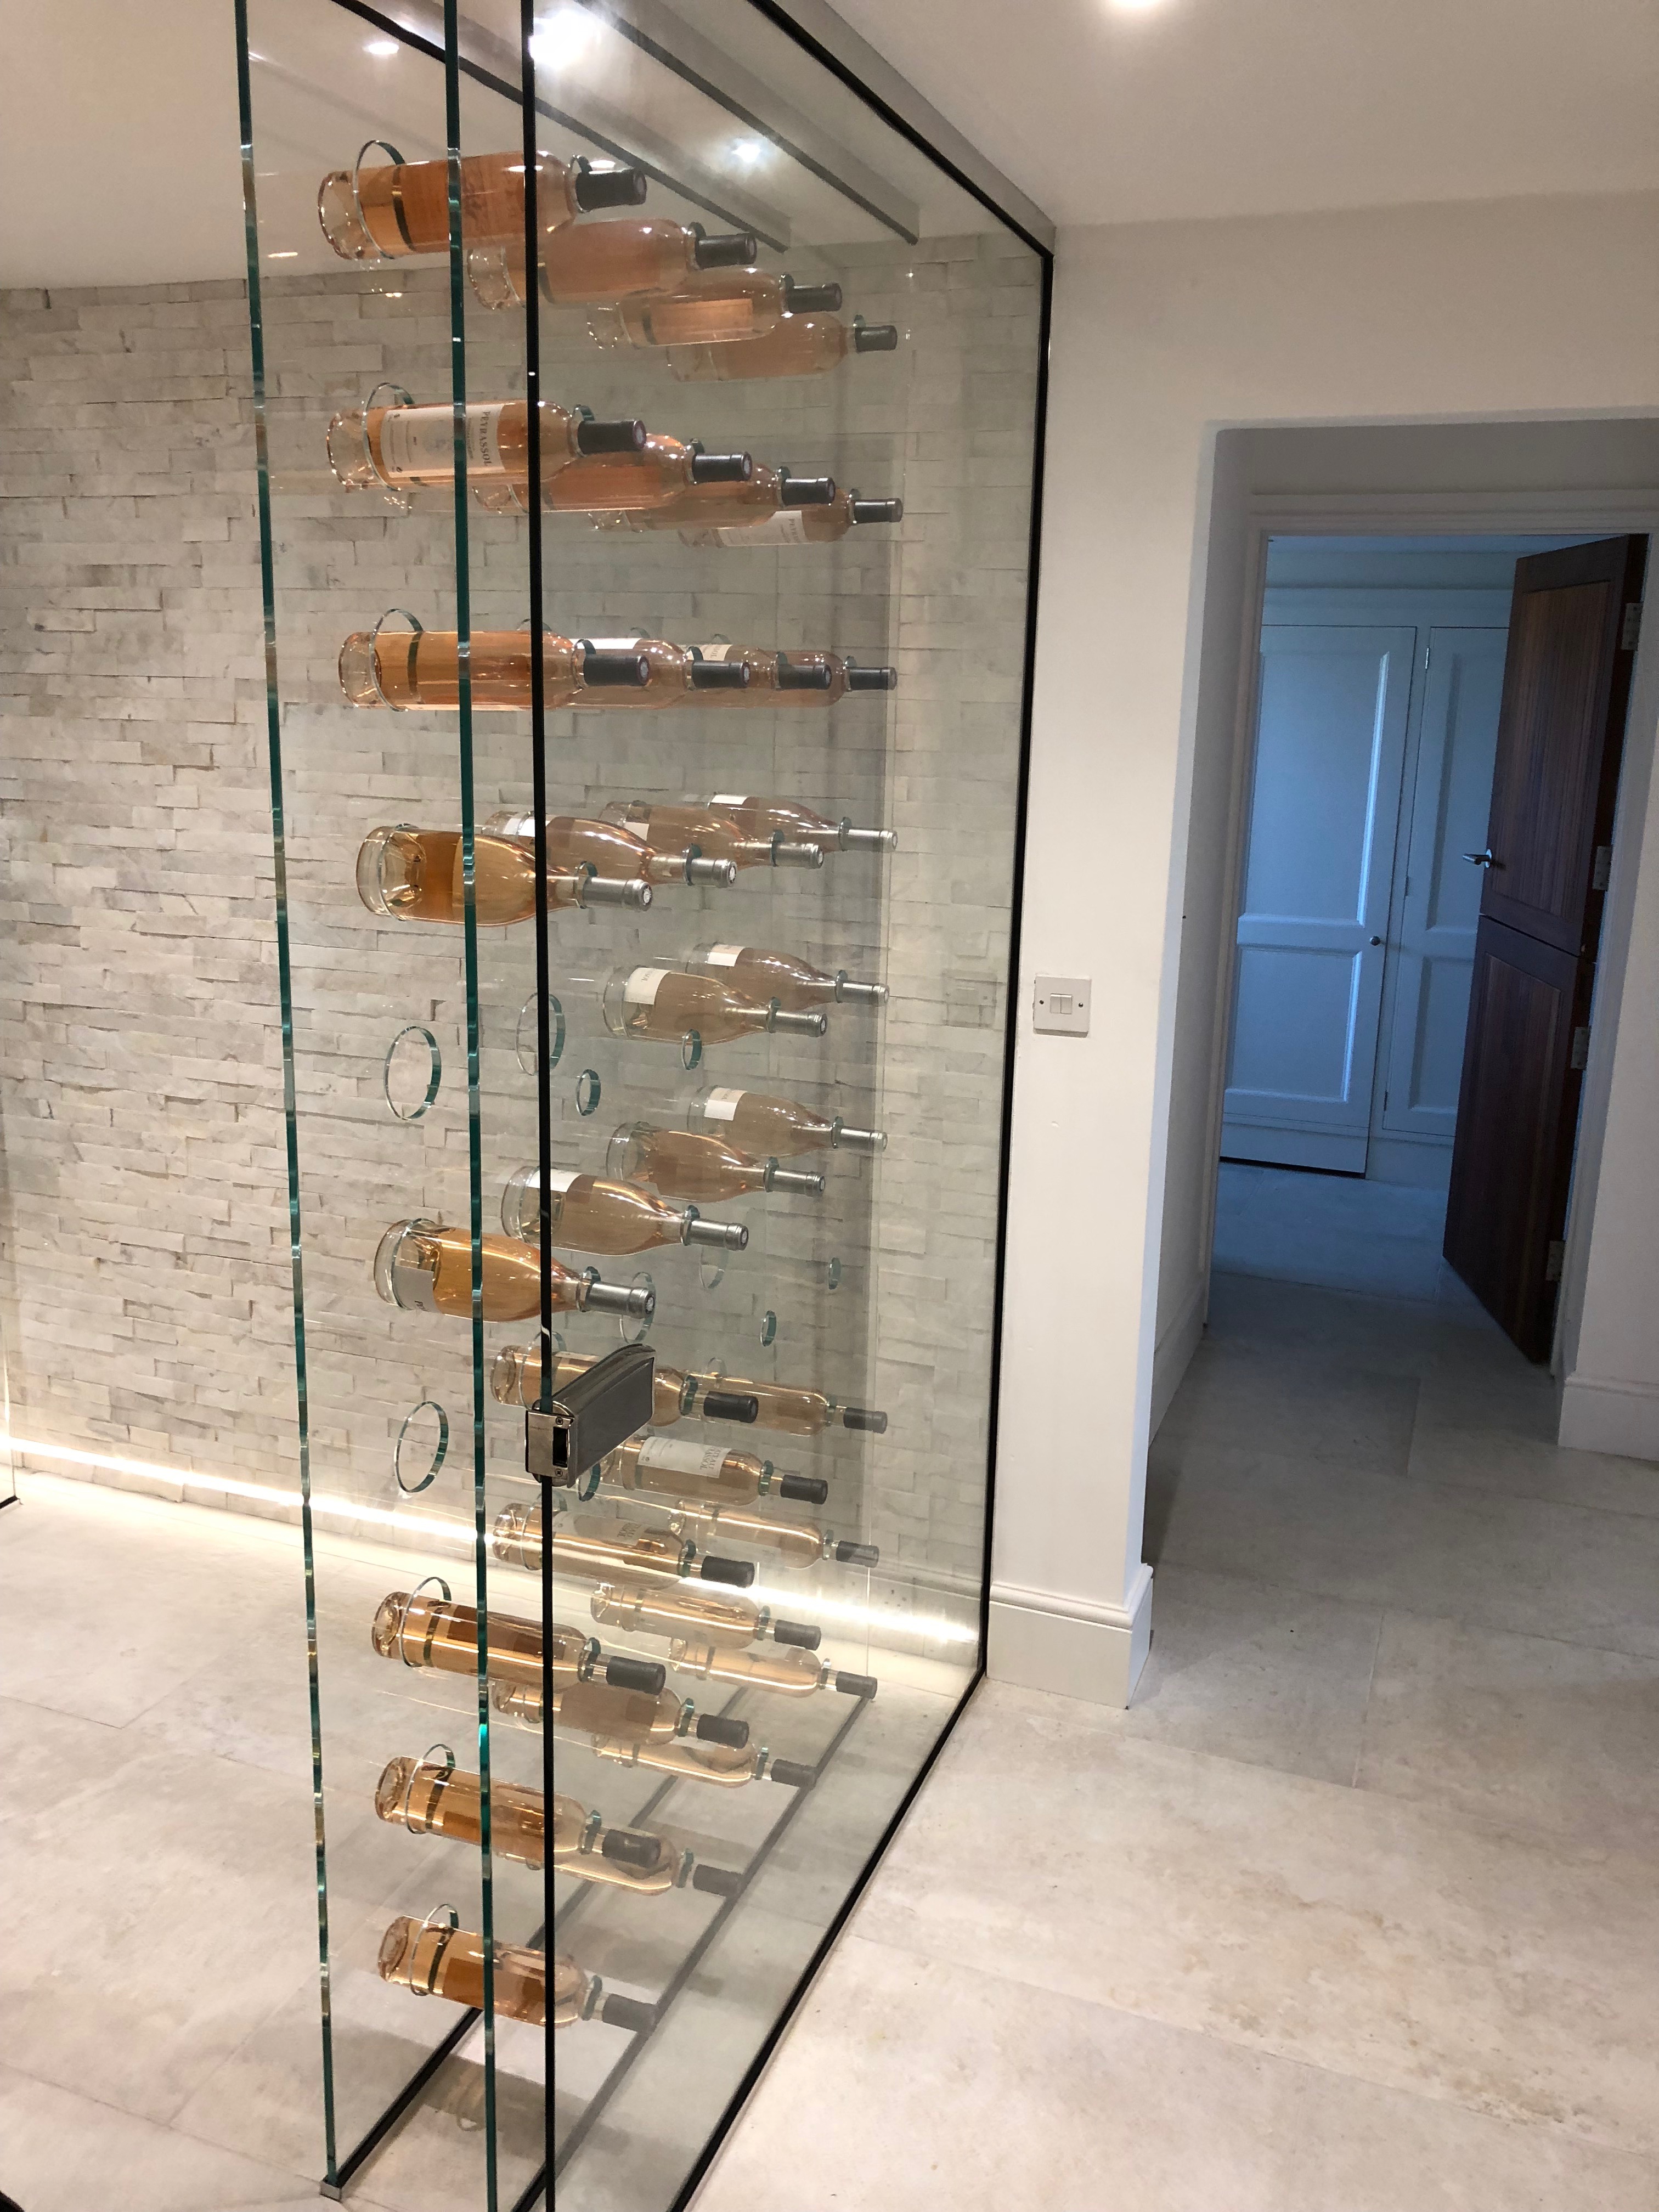 Glass and wine bottles in a room